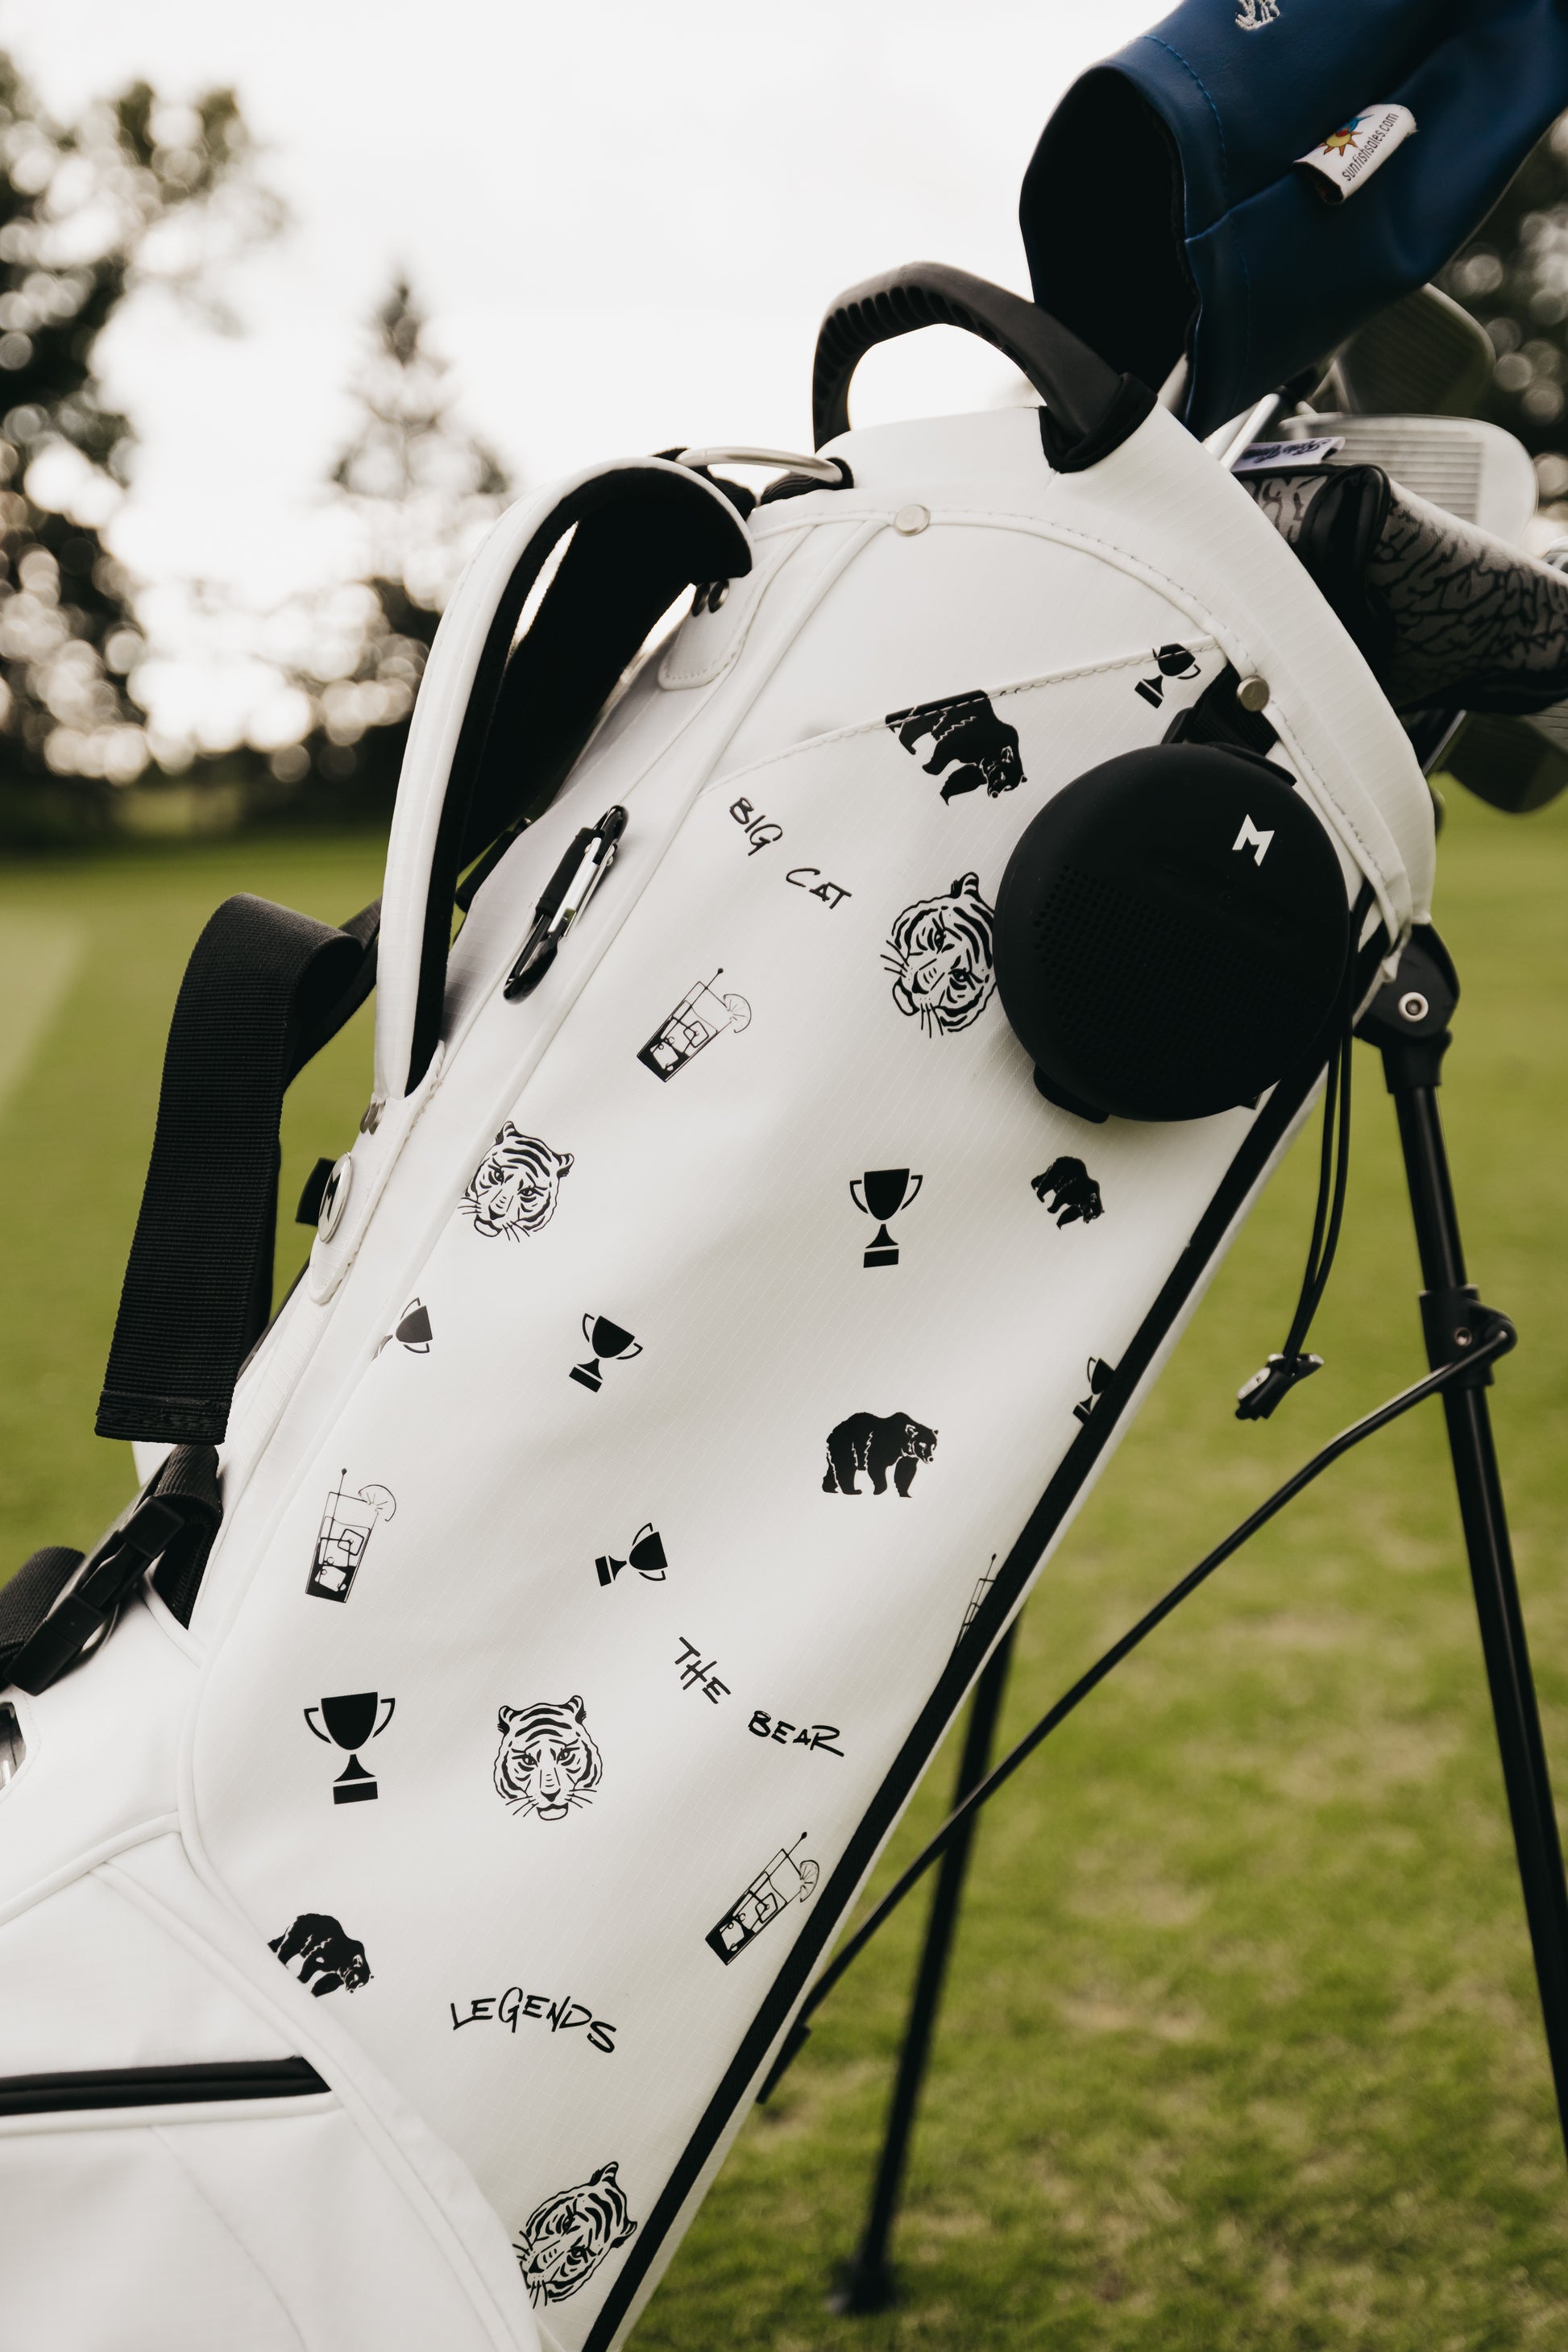 MNML GOLF collaborated with Swannies golf to hand paint their speckled company graphics.